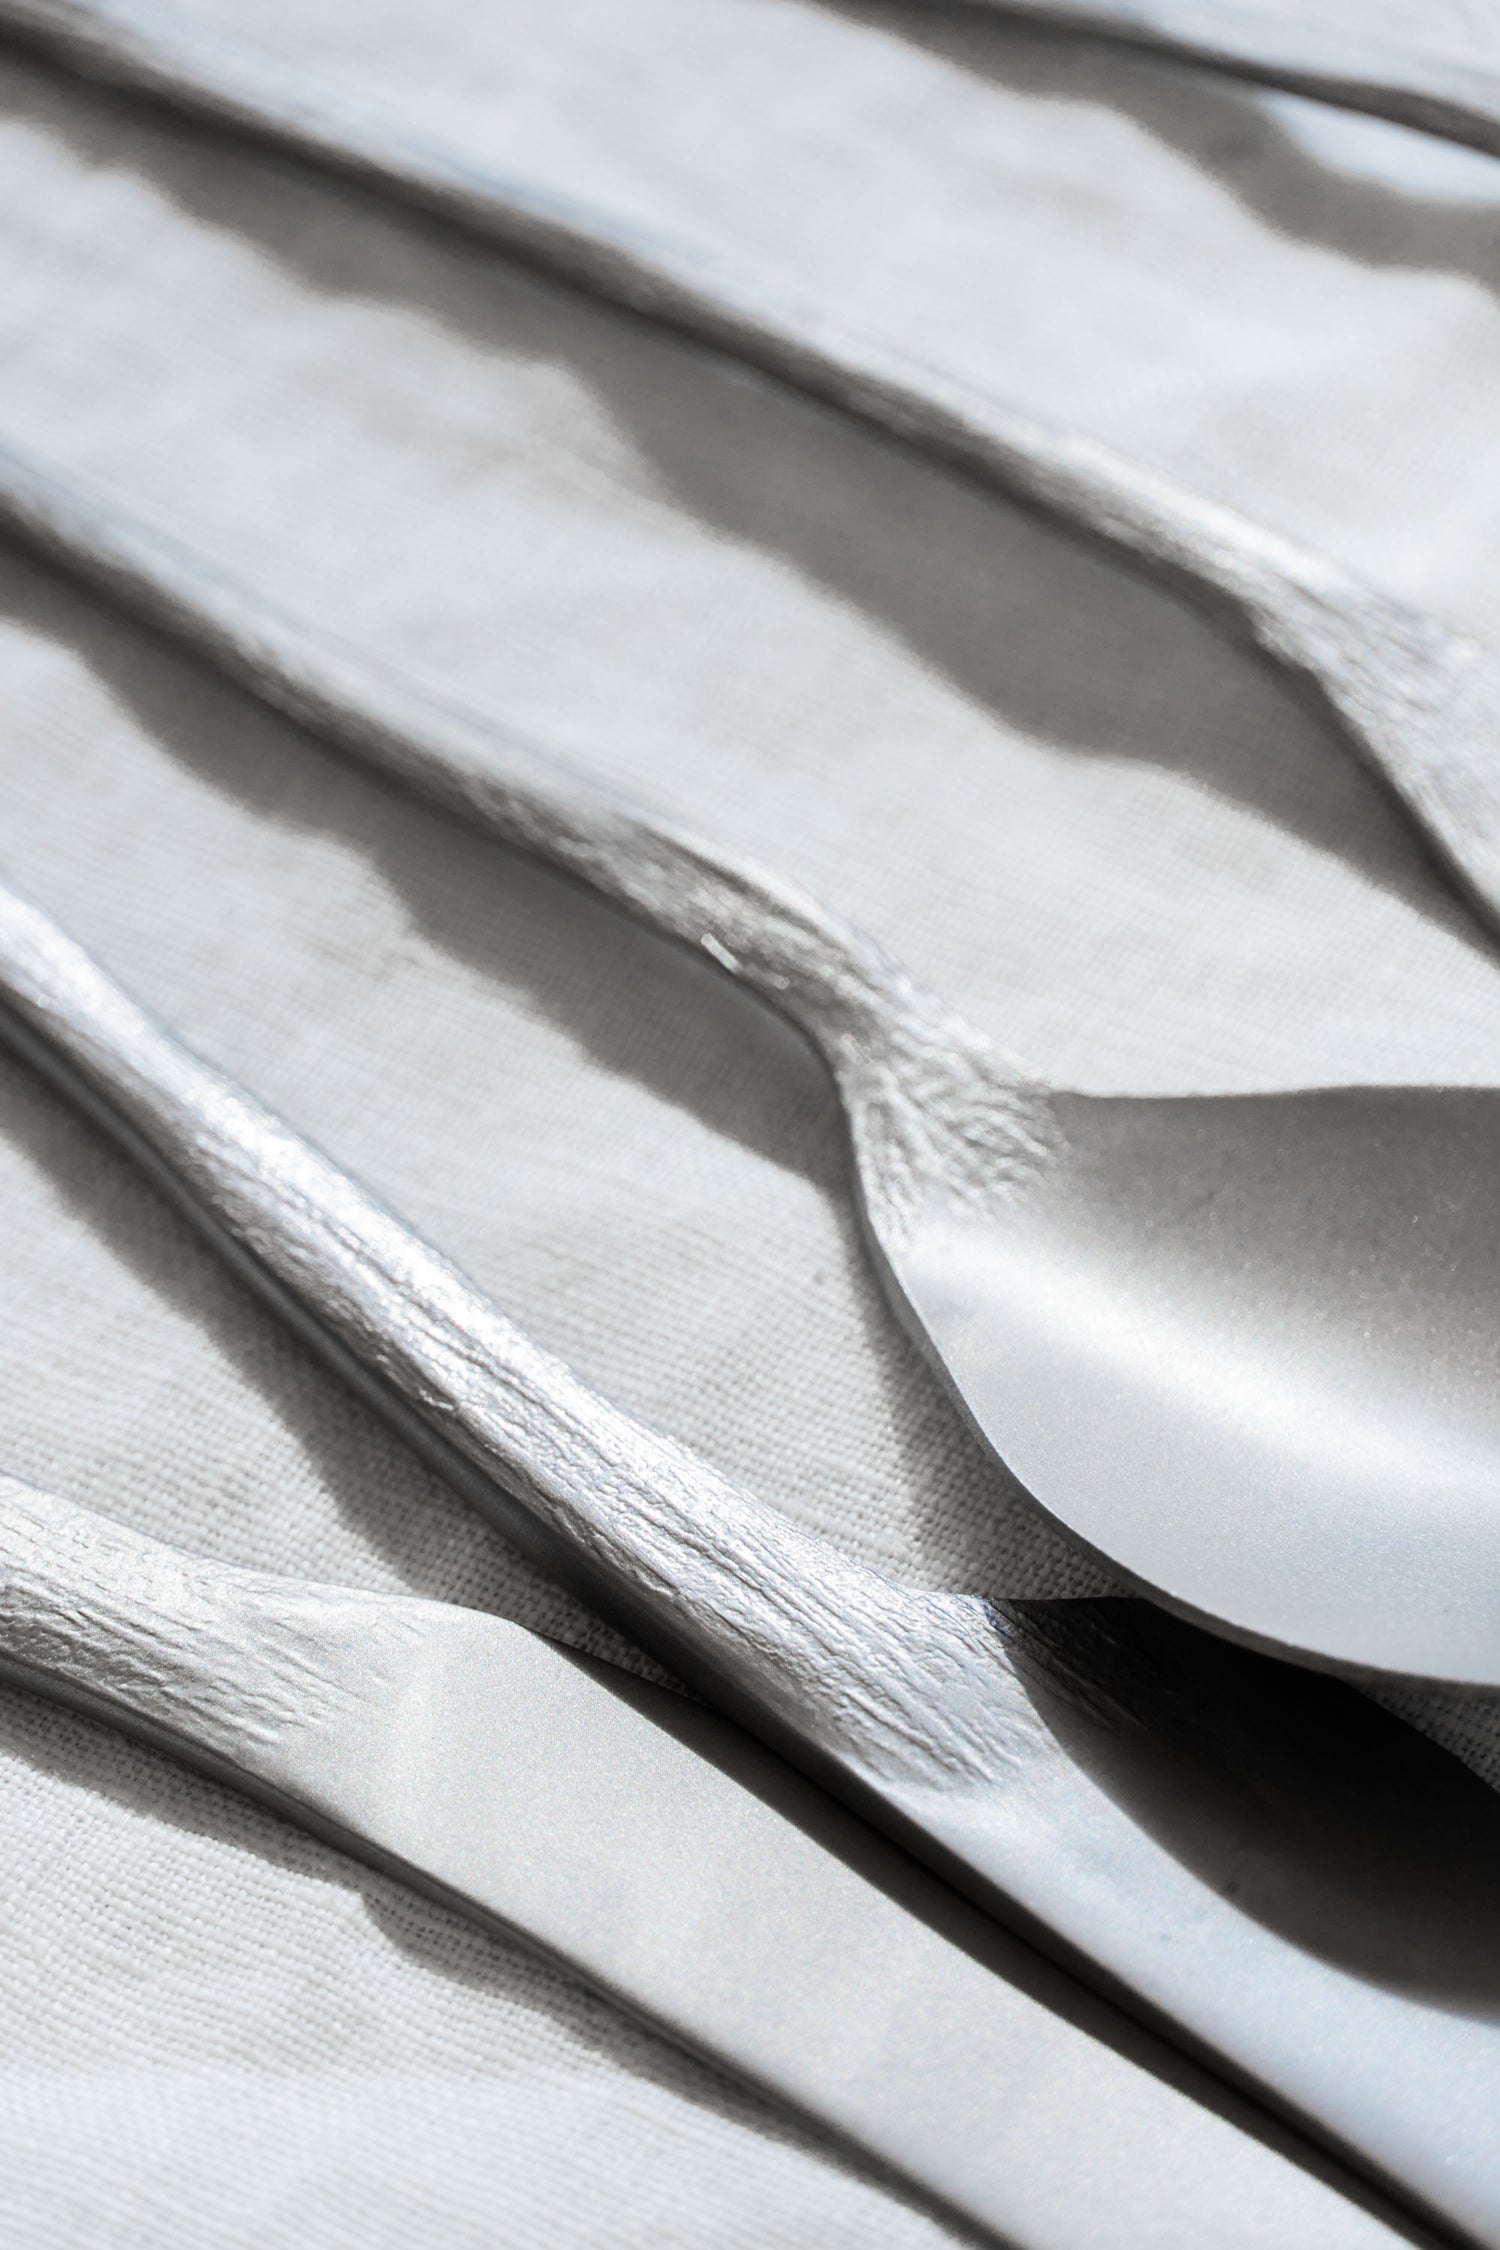 Details : Flora Vulgaris Cutlery Collection by Serax.